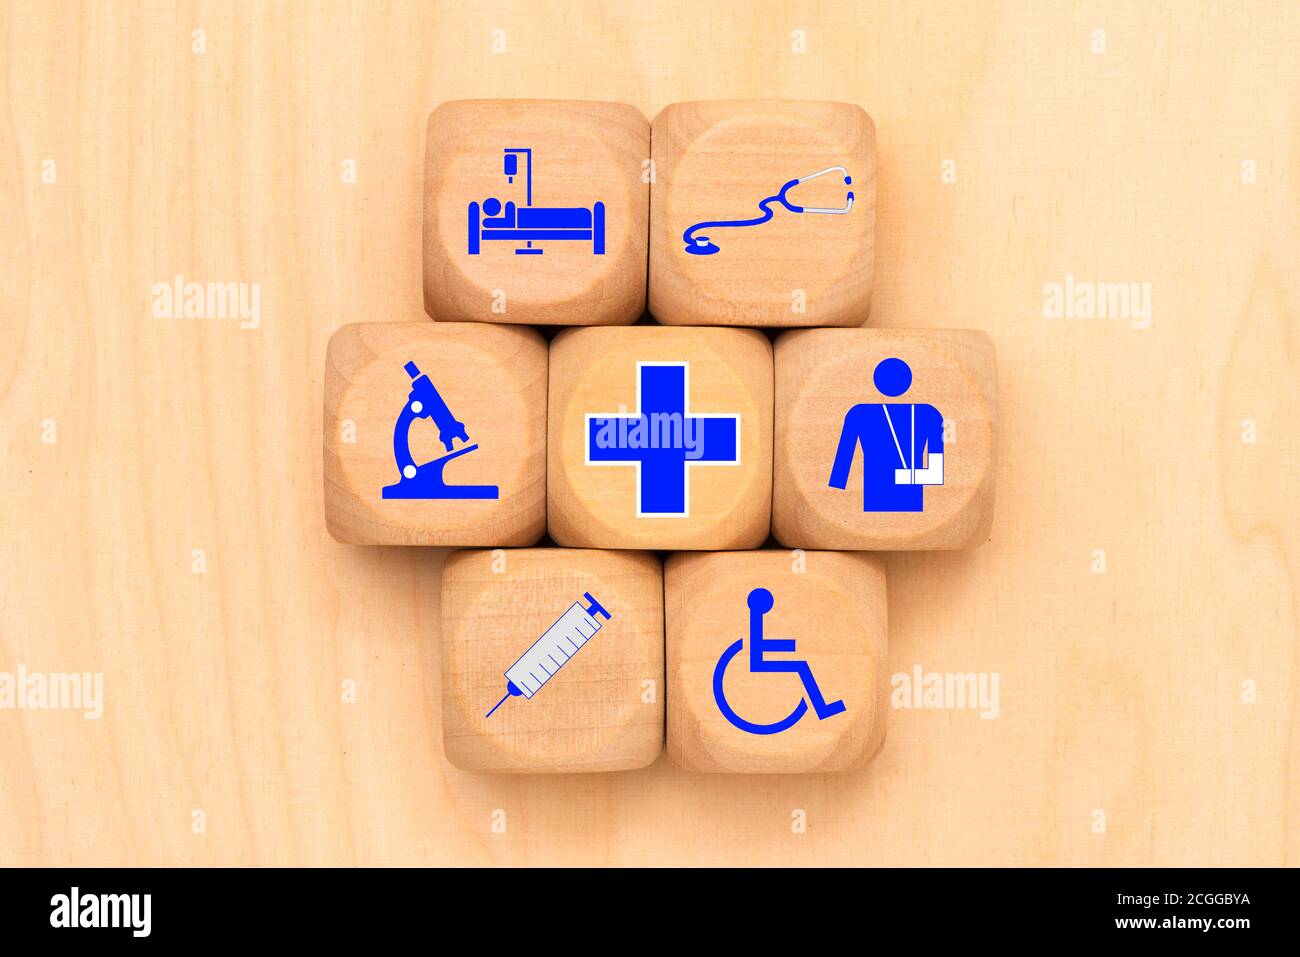 Medical care as a symbol on wooden cubes Stock Photo